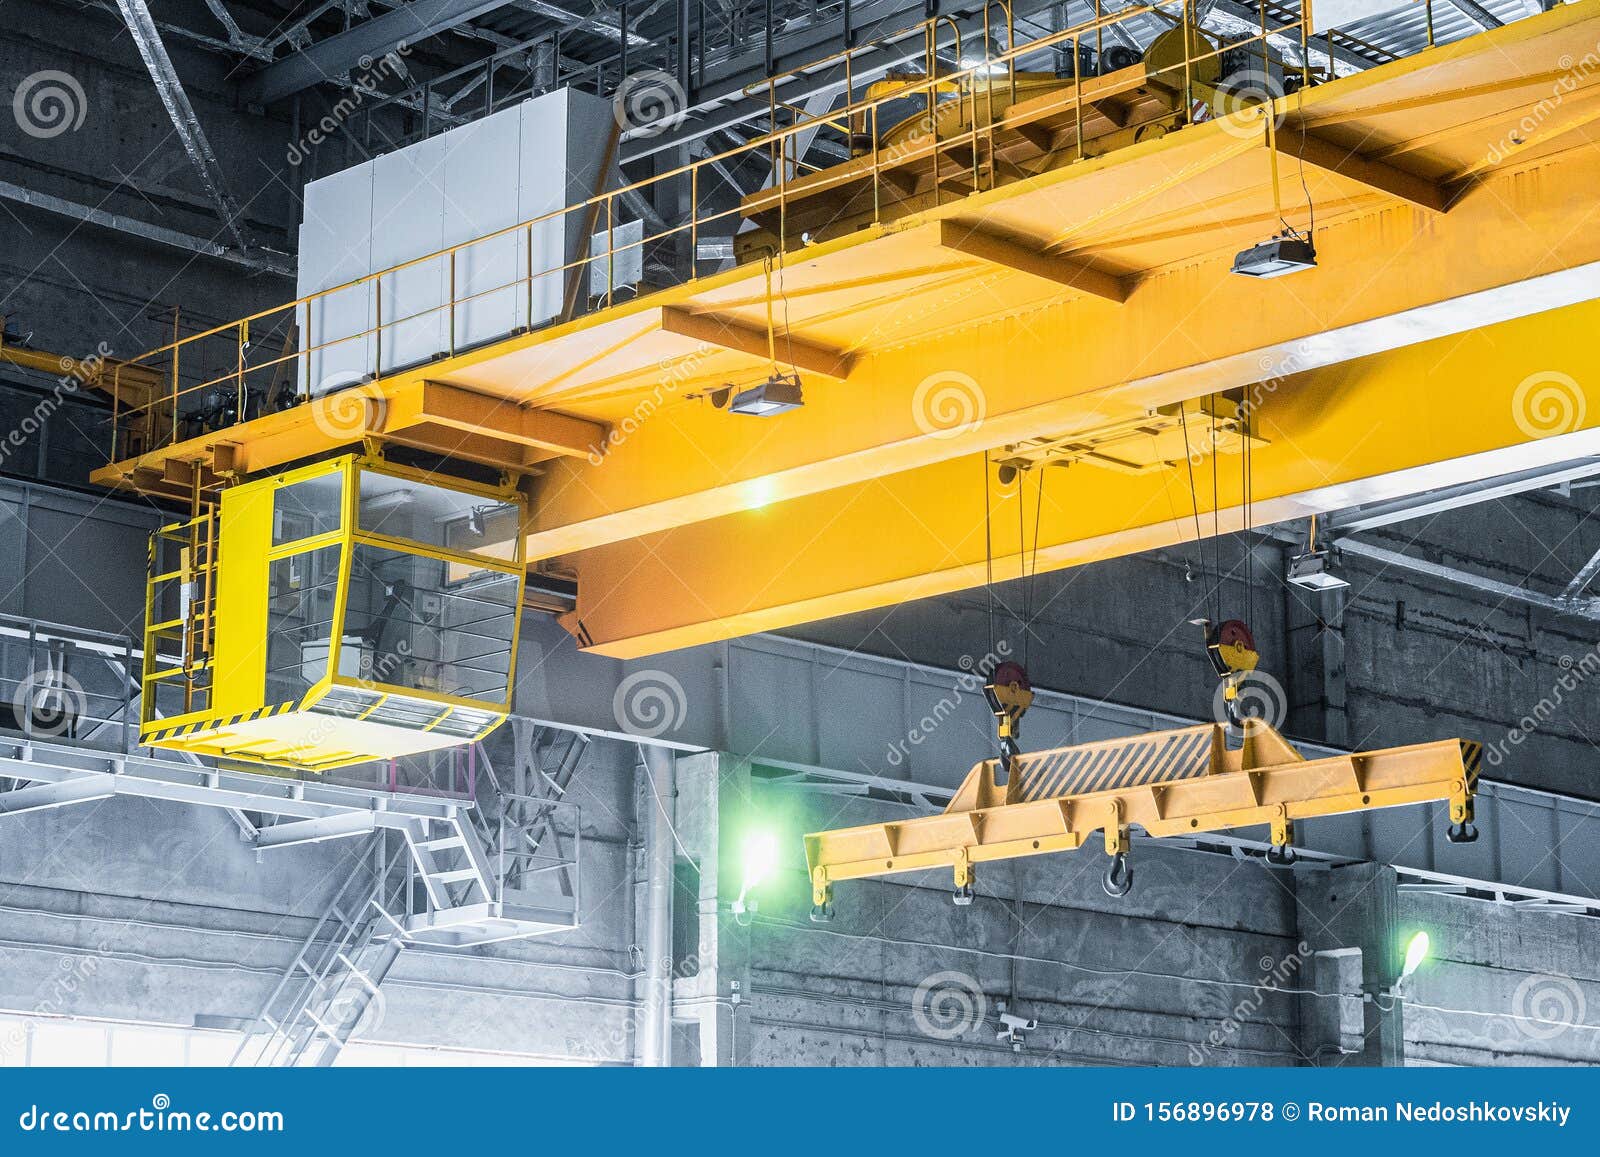 yellow overhead crane with linear traverse and hooks in engineering plant shop